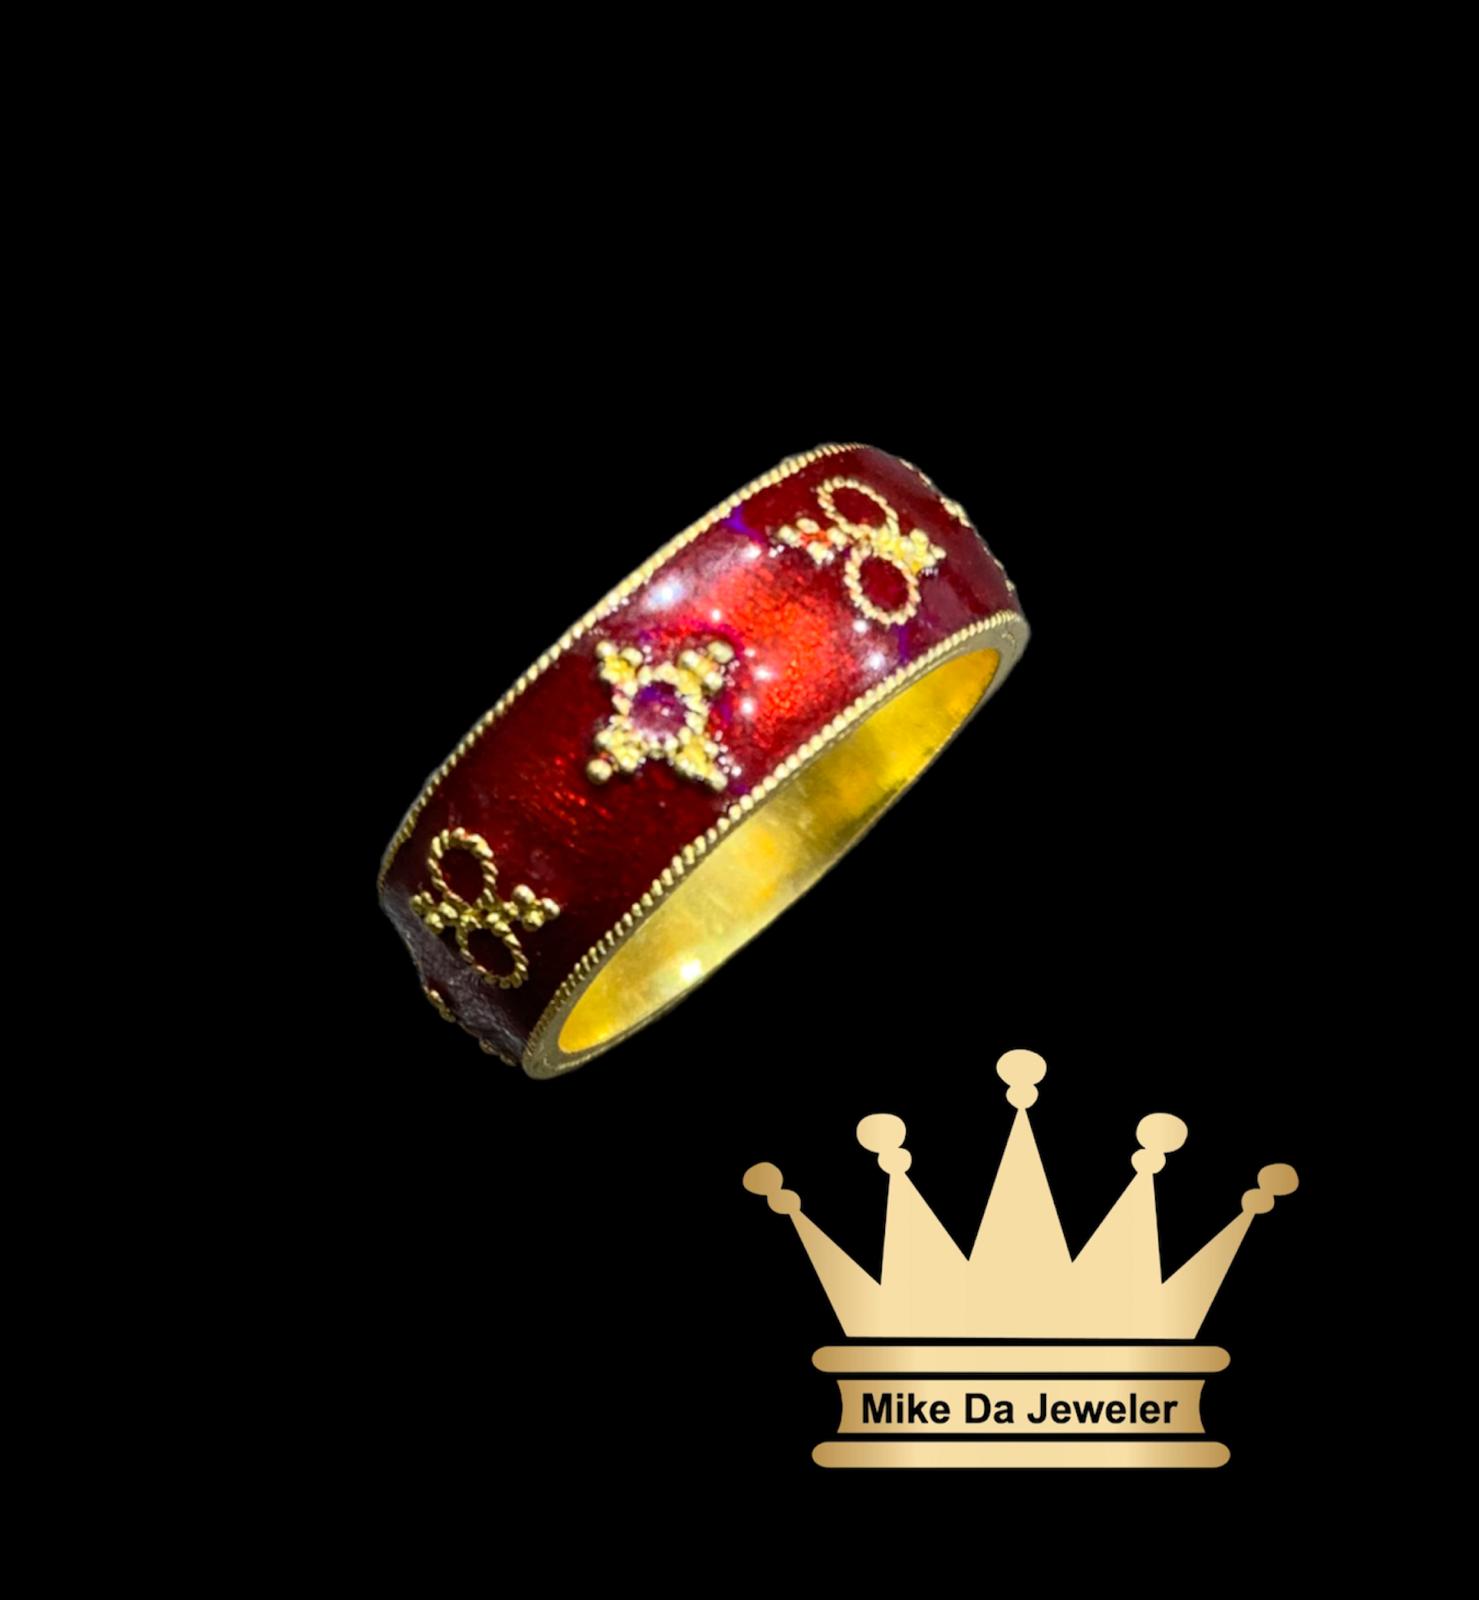 21 k handmade color customized ring price $1200 dollar weight 10.25 grams size 9